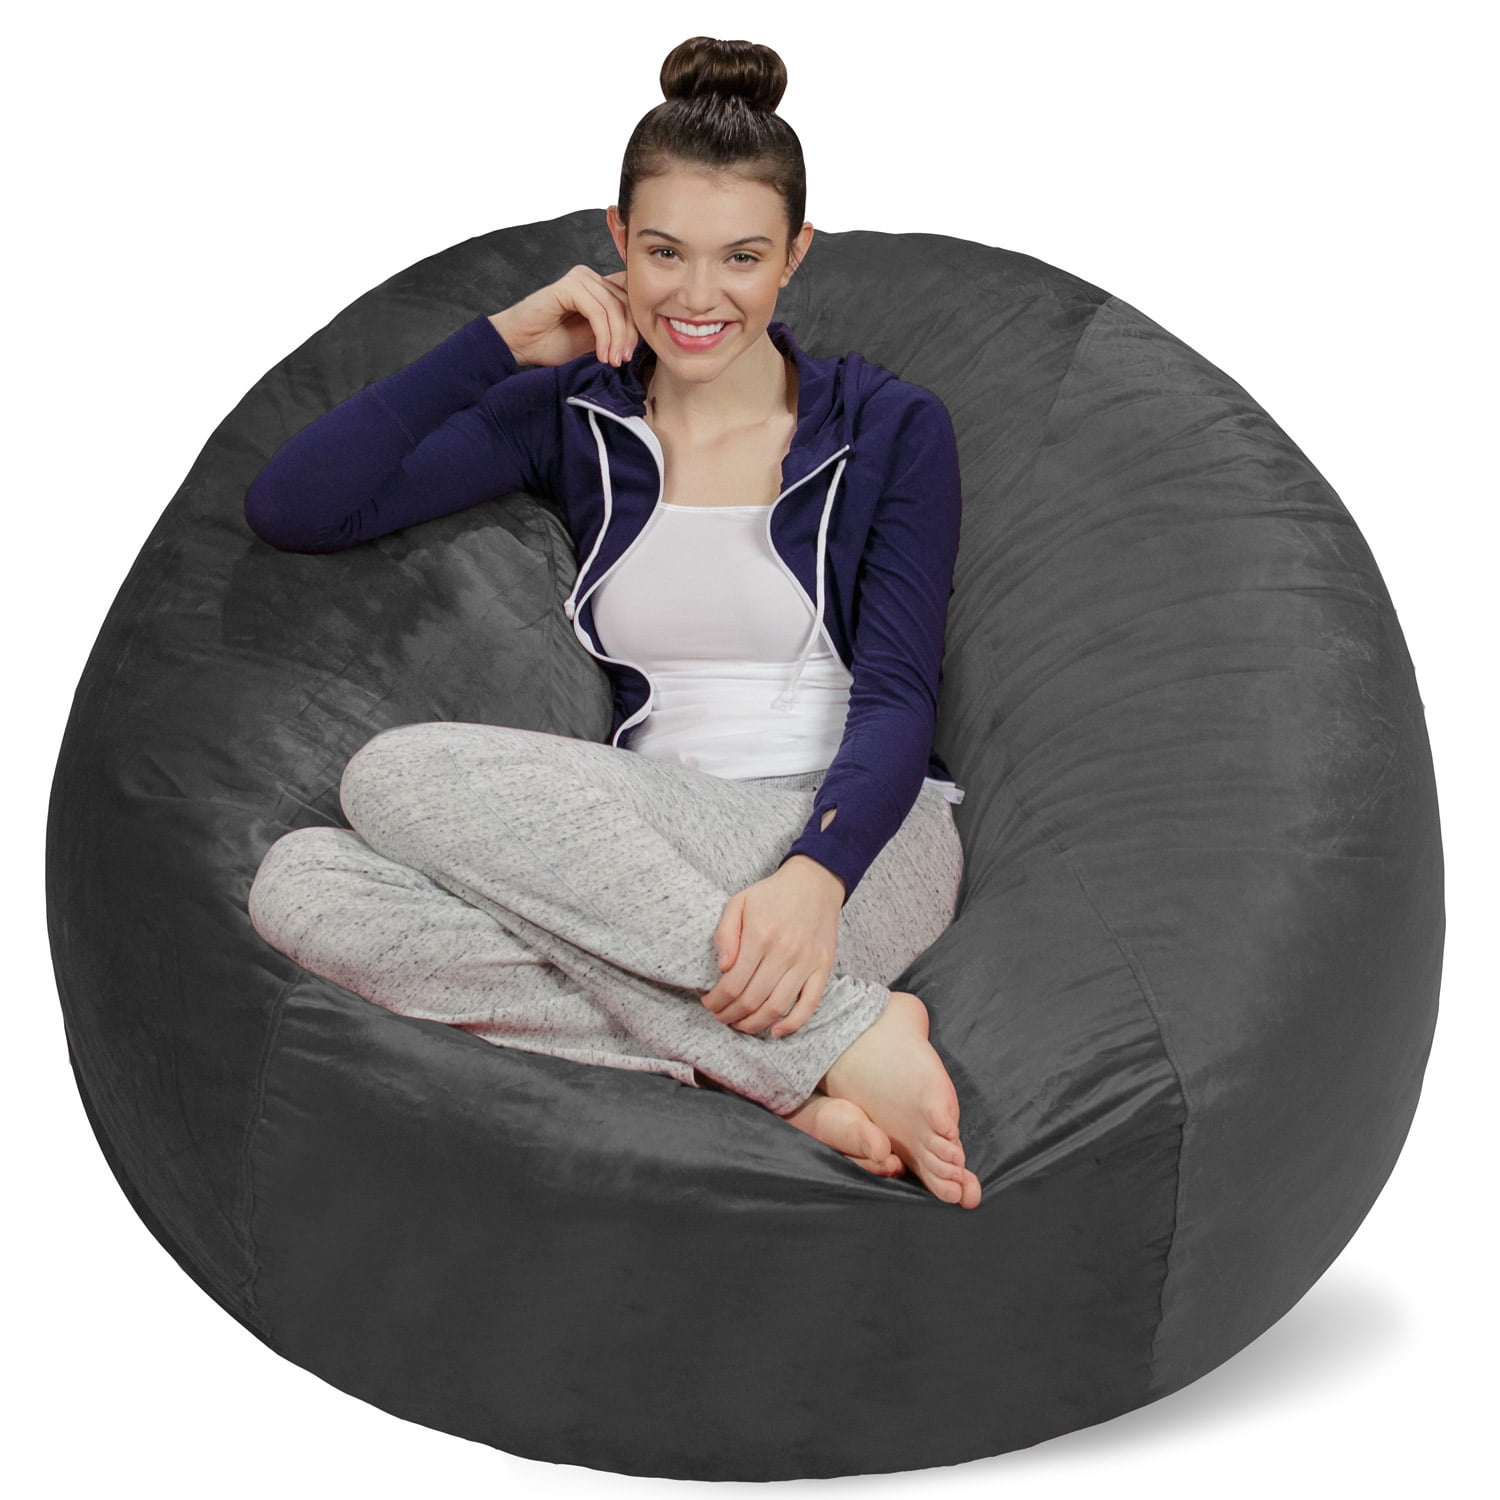 ComfyBean Bag with Beans Filled XXXL- Official: Garfield Bean Bags - for  Young Adults - Max User Height : 5-5.8 Ft.-Weight : 60-70 Kgs(Model:  Garfield_ARTWORK-11 - Black) : Amazon.in: Health & Personal Care